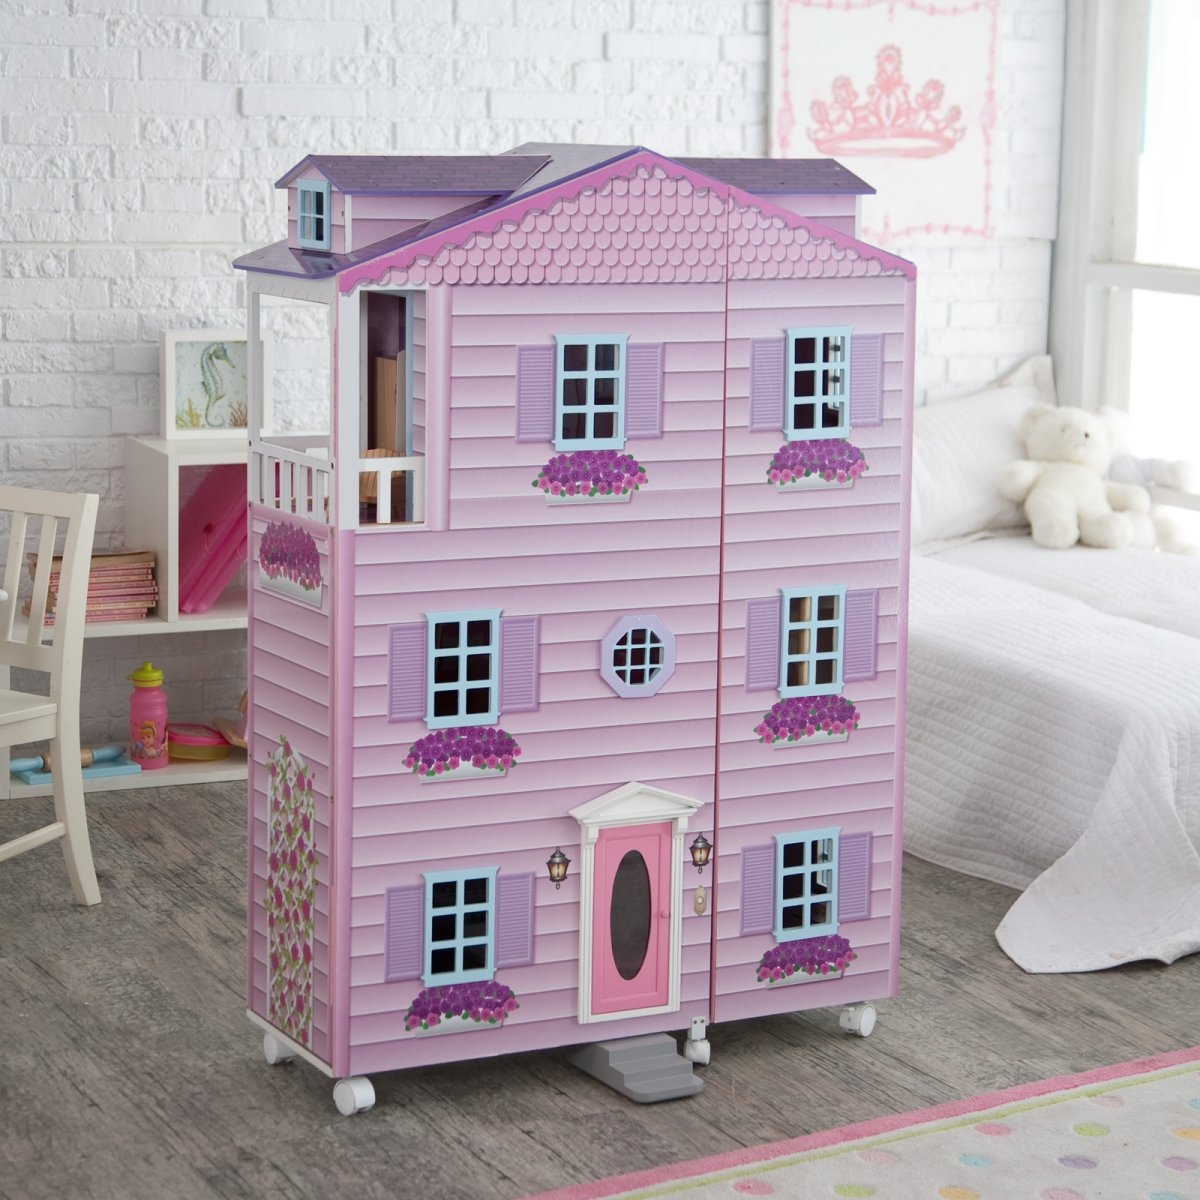 Large wooden dollhouse 3